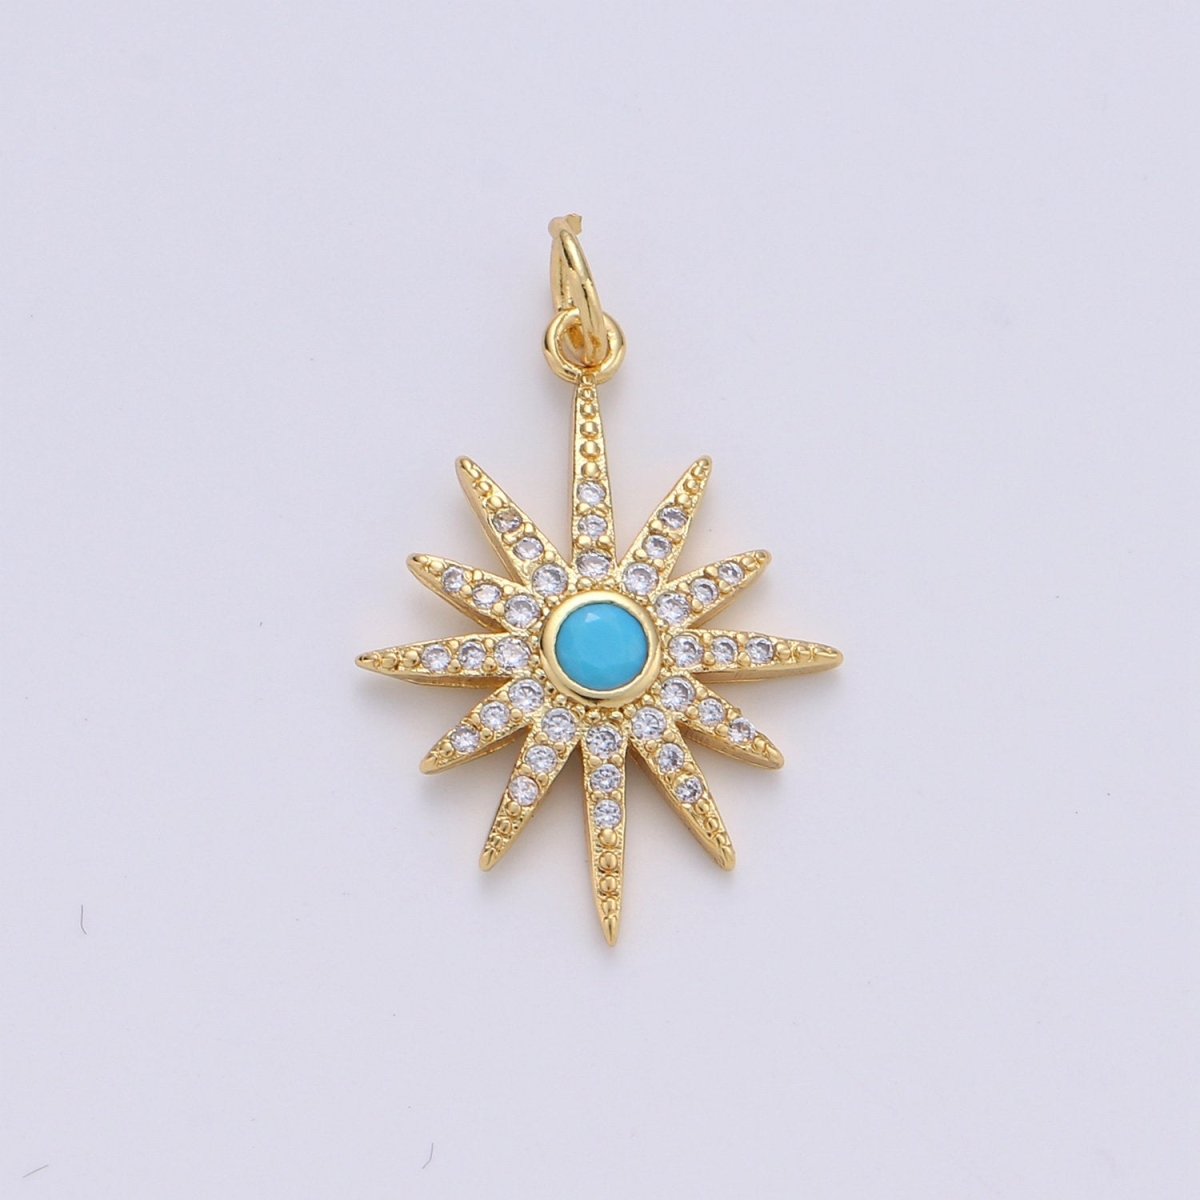 24k Gold Filled Micro Pave Star Charm, Blue North Star Moon Pendant Charm, Gold Filled Charm, For DIY Necklace Bracelet Earring D-246 - DLUXCA